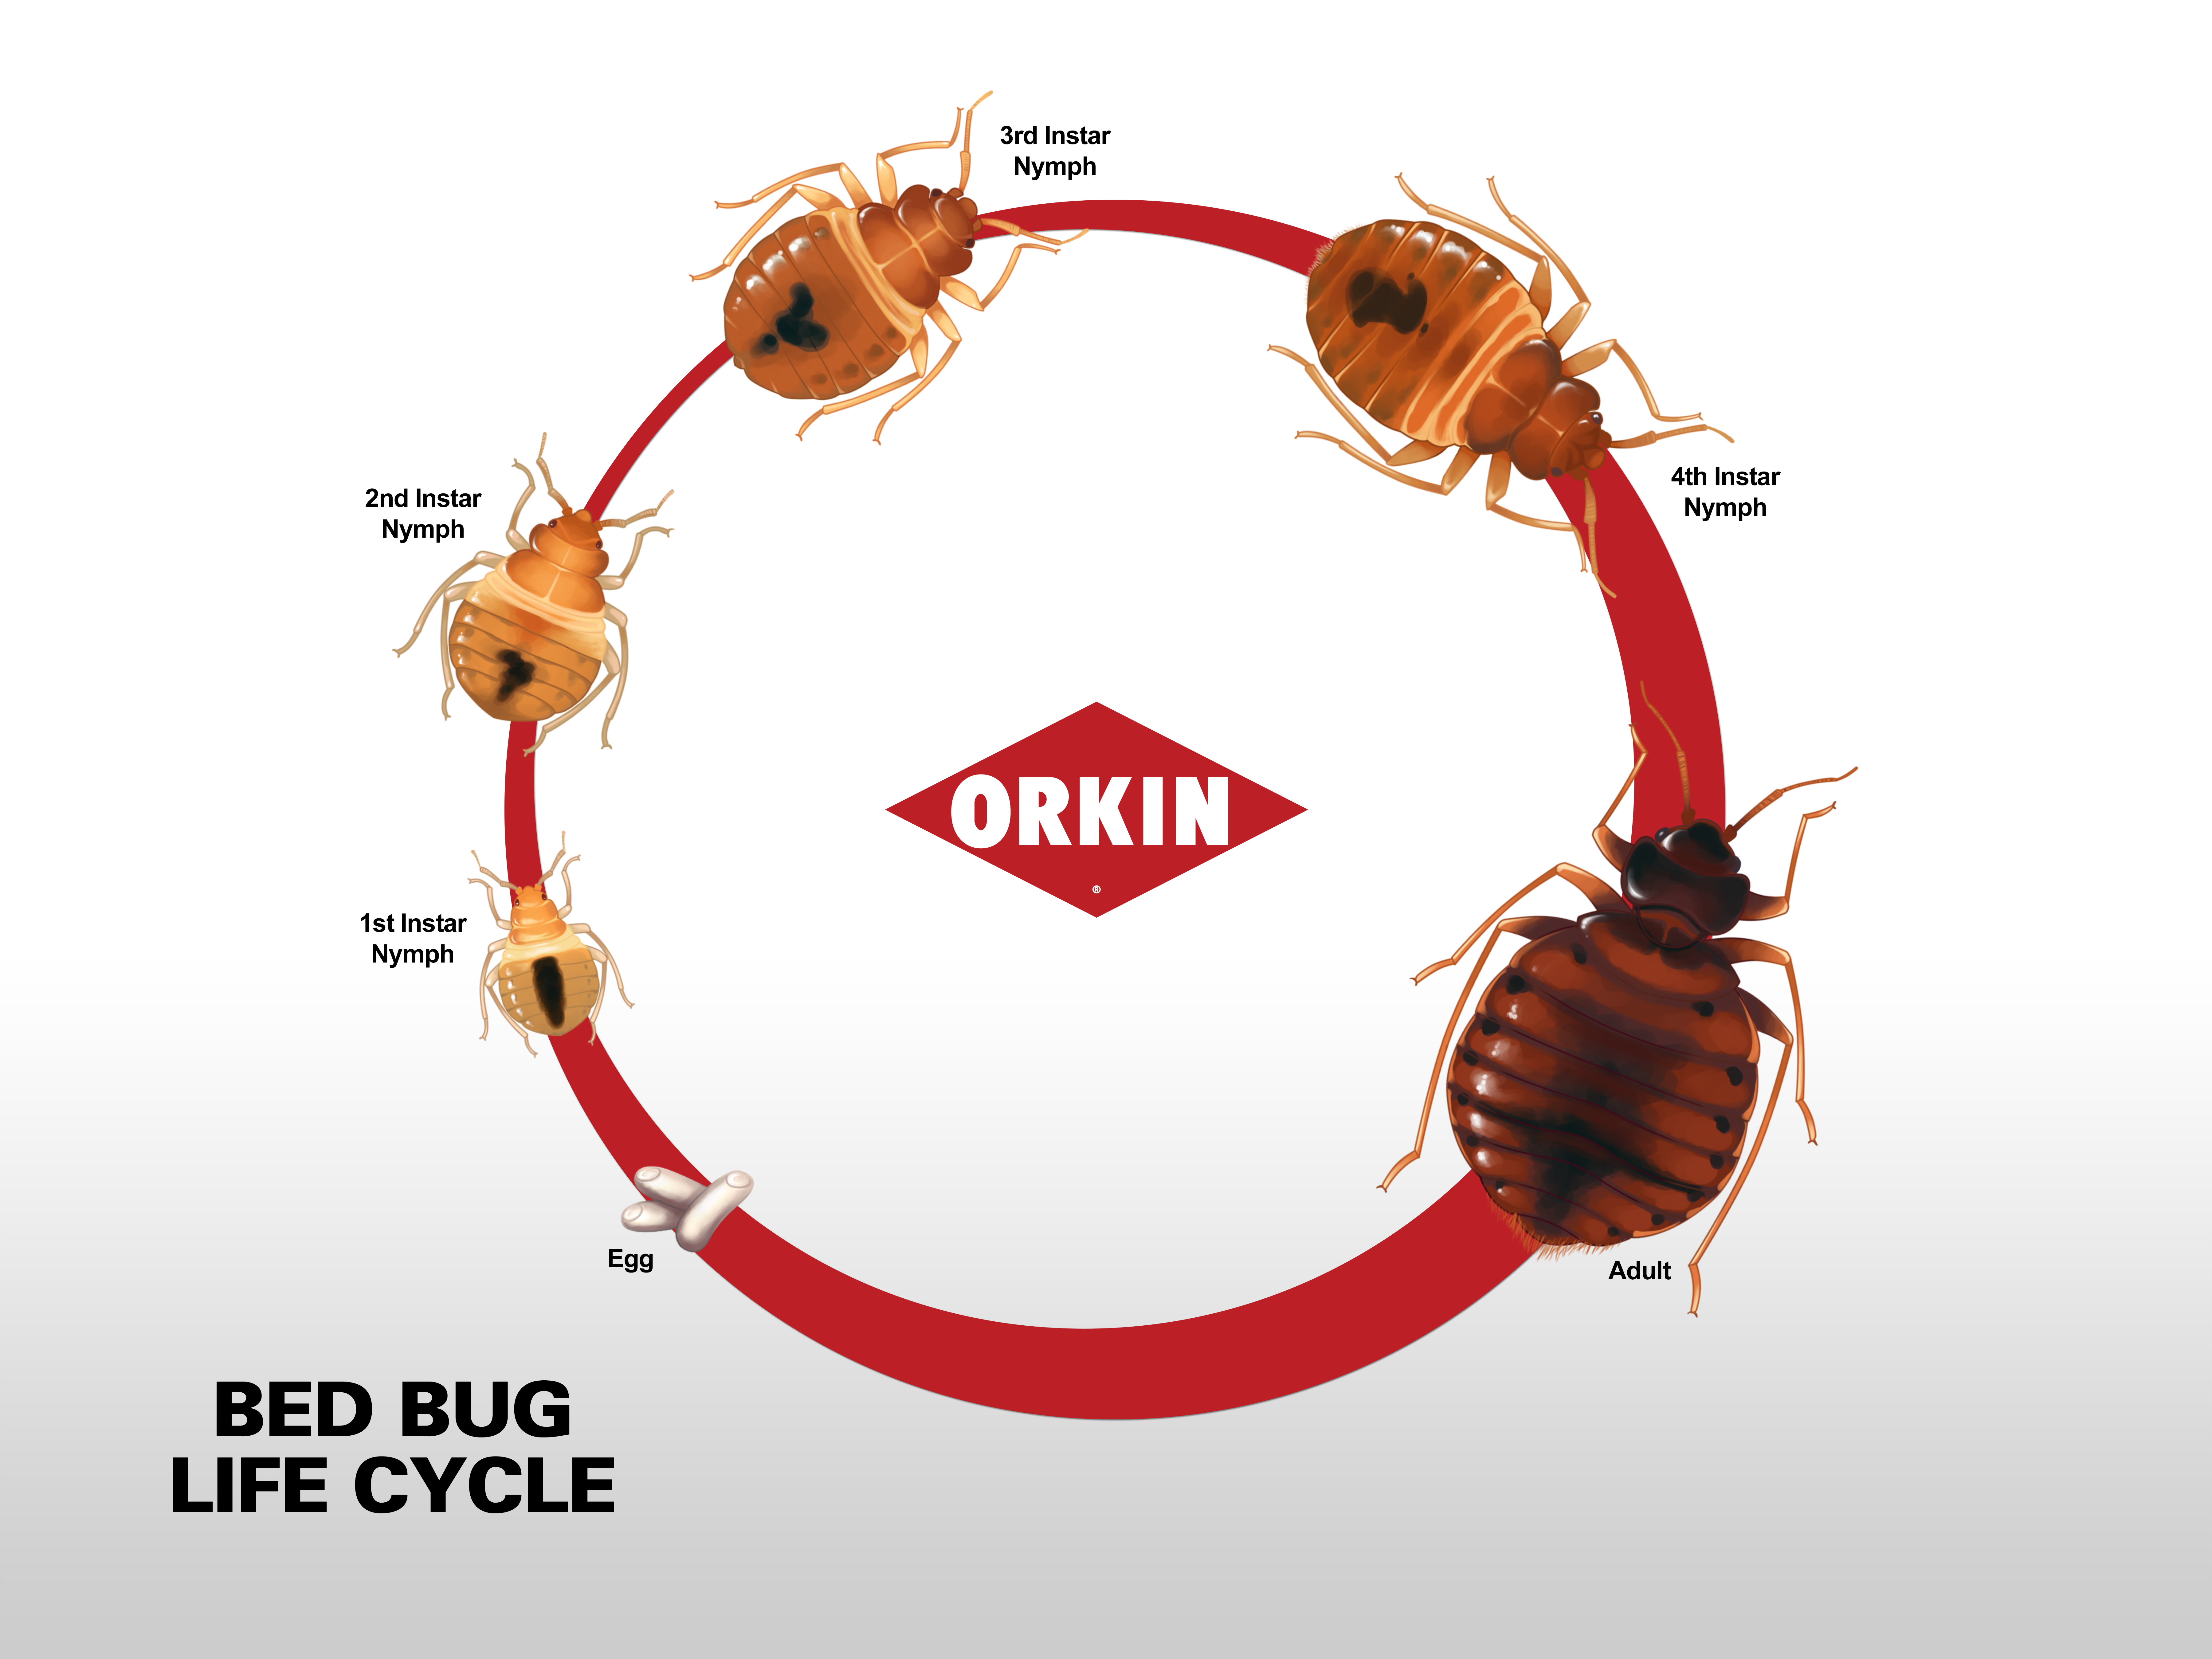 How Do Bed Bugs Reproduce?